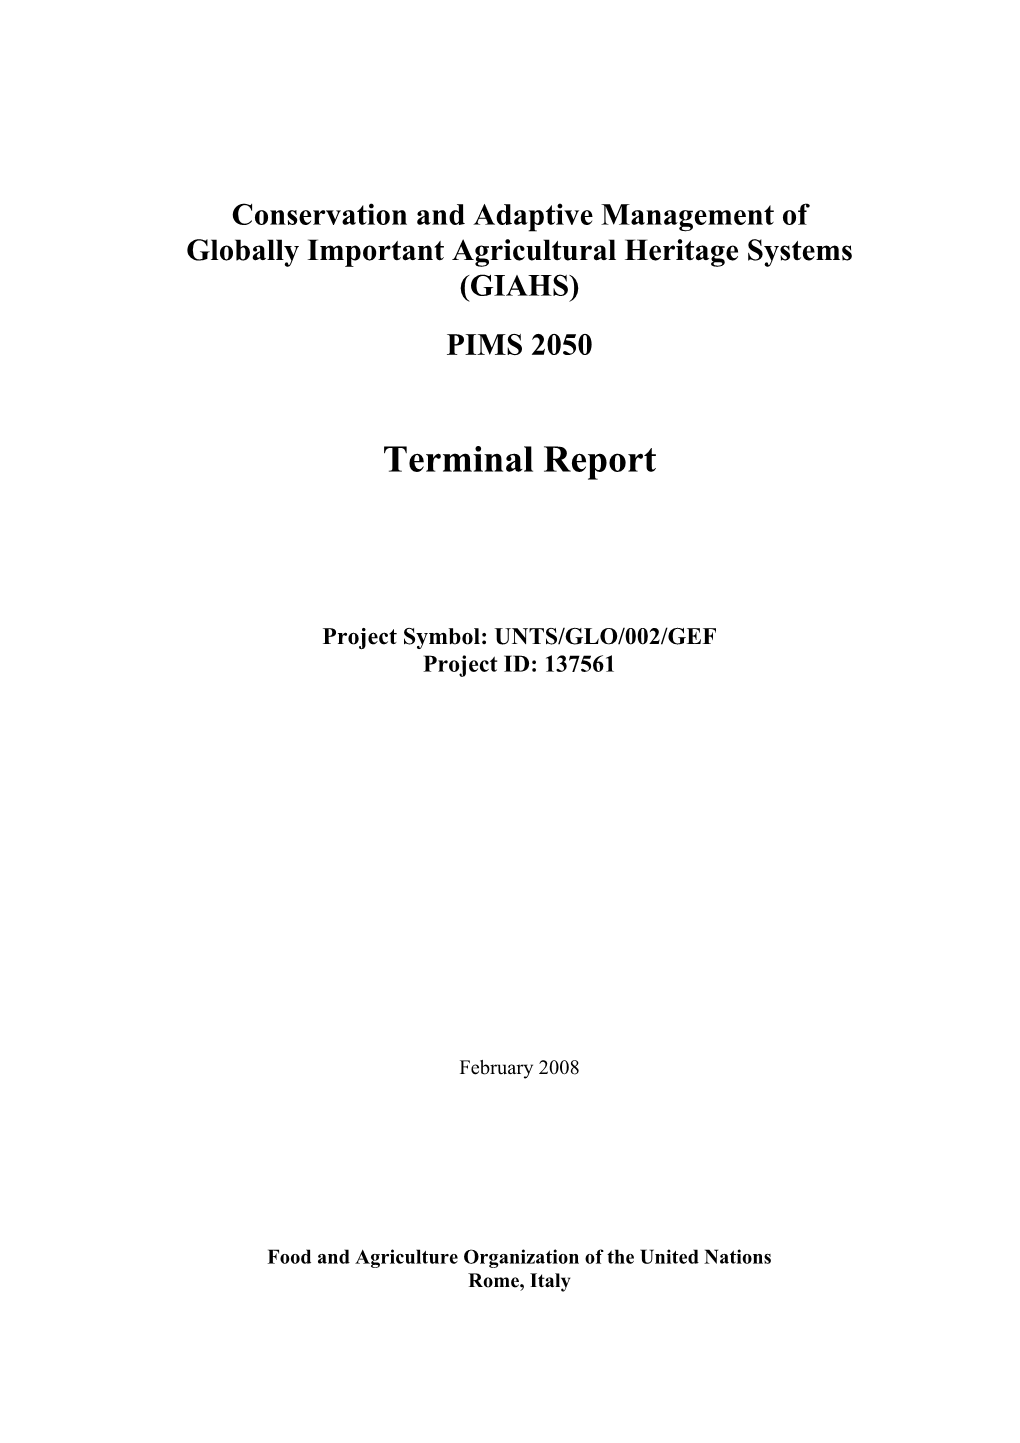 Conservation and Adaptive Management of Globally Important Agricultural Heritage Systems (GIAHS)